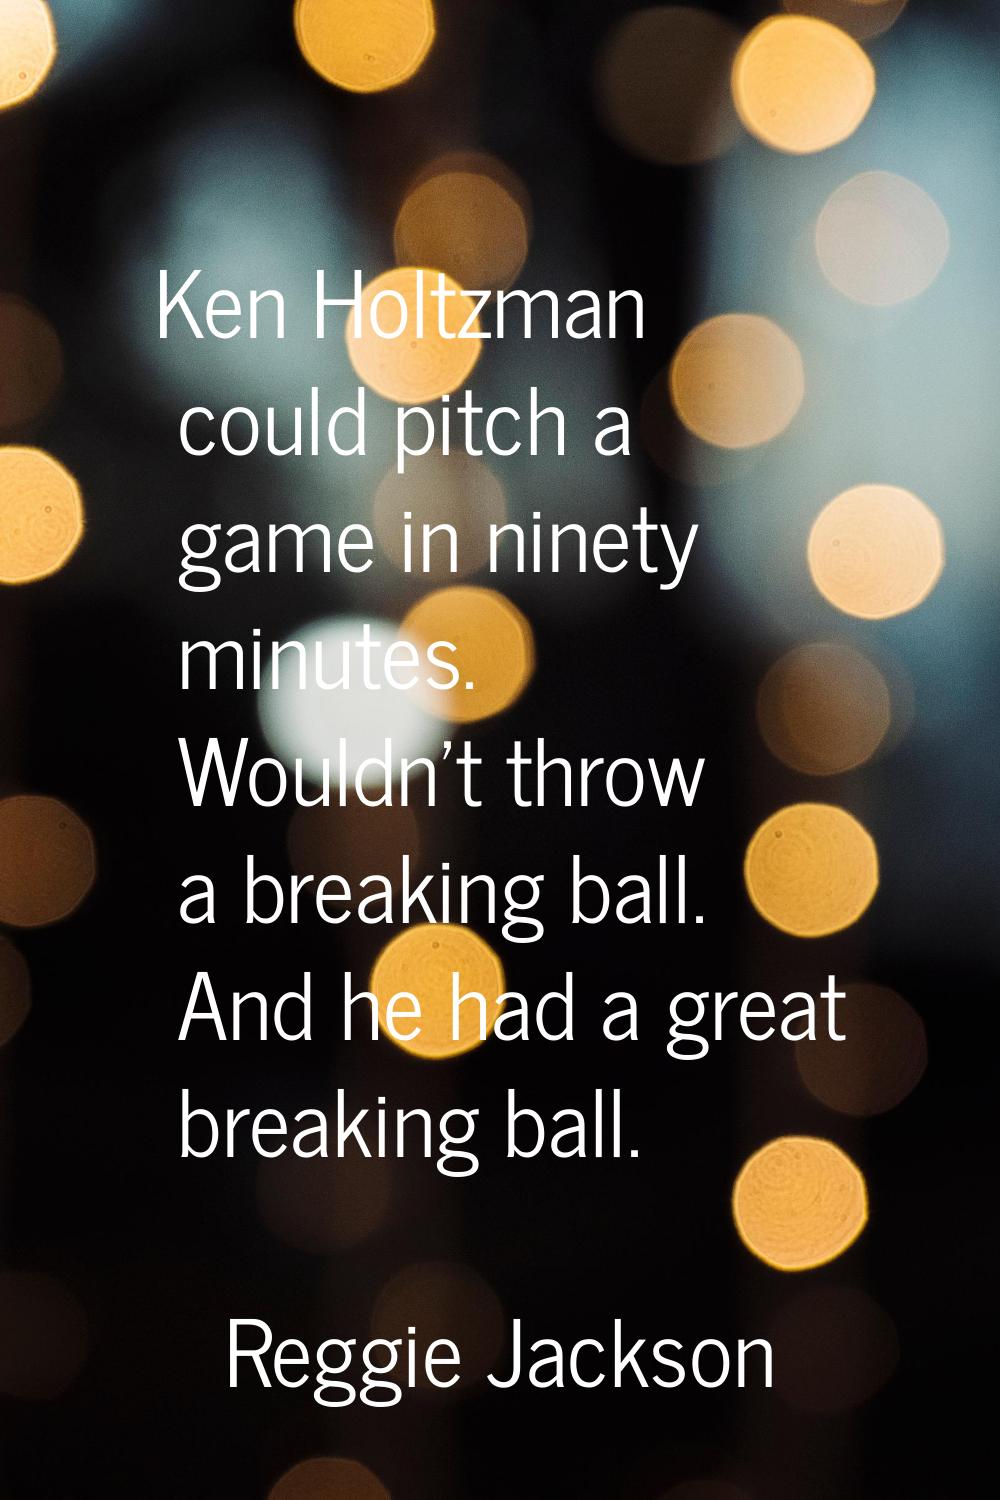 Ken Holtzman could pitch a game in ninety minutes. Wouldn't throw a breaking ball. And he had a gre